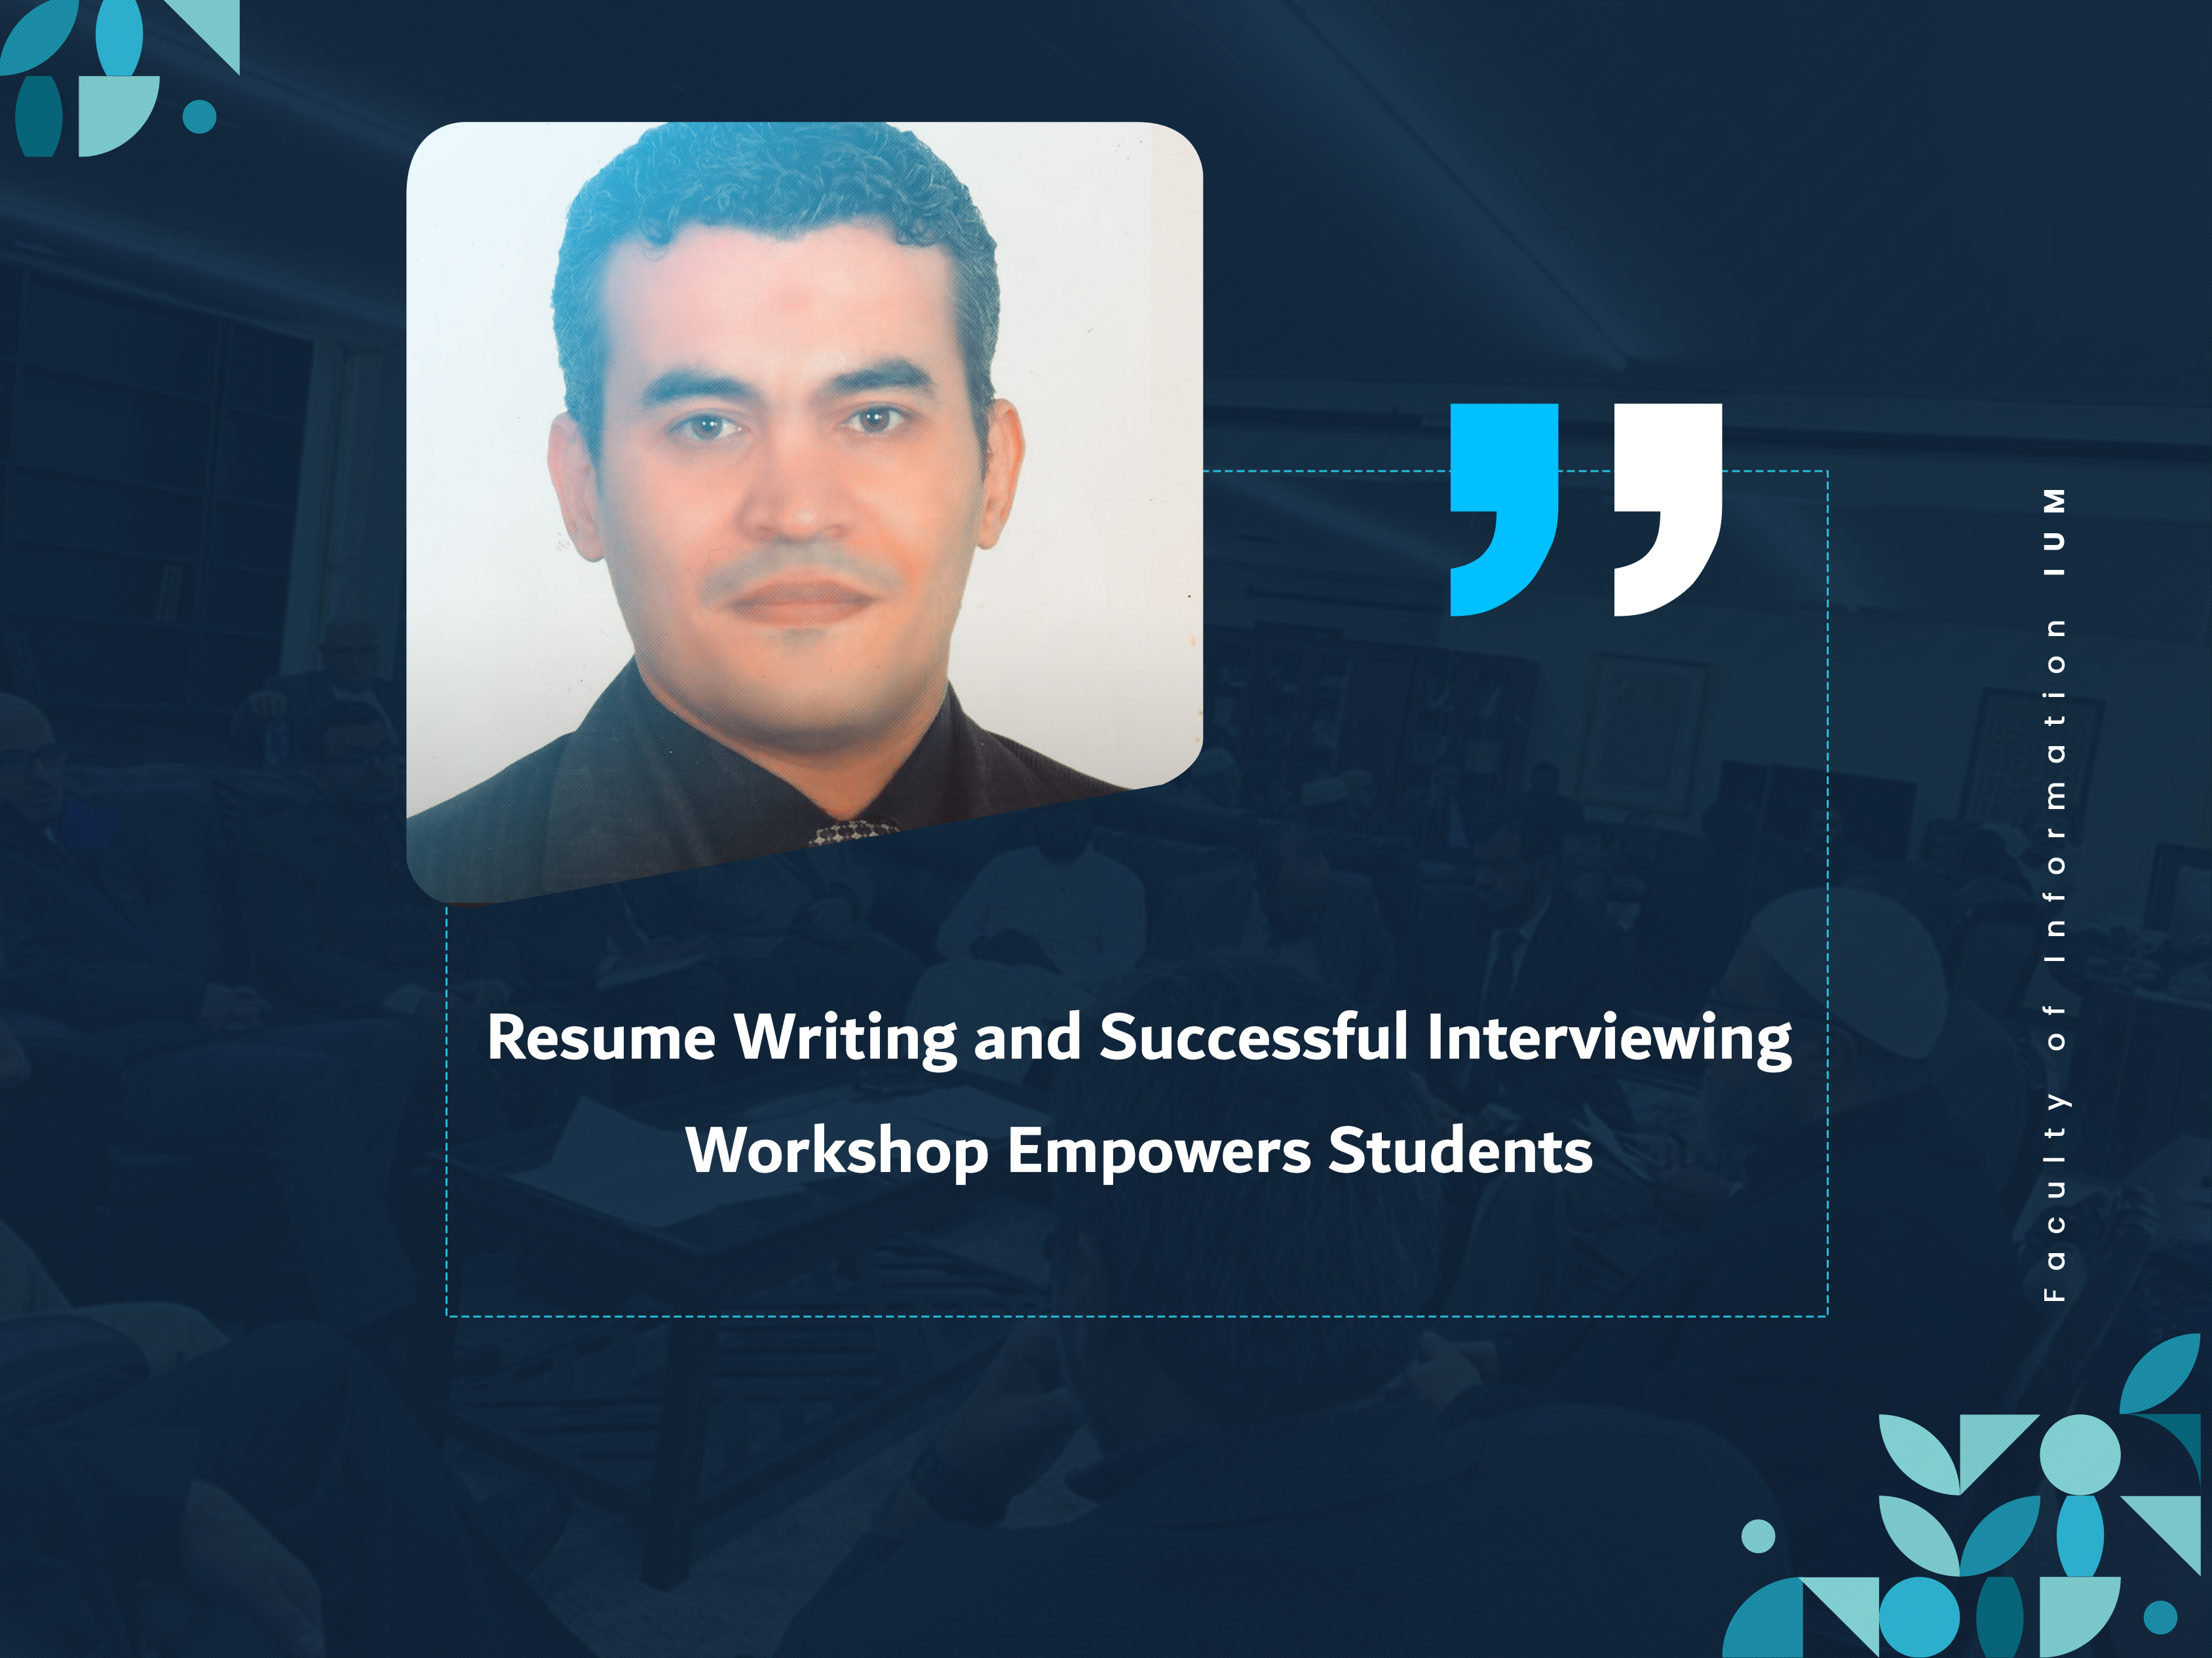 Resume Writing and Successful Interviewing Workshop Empowers Students